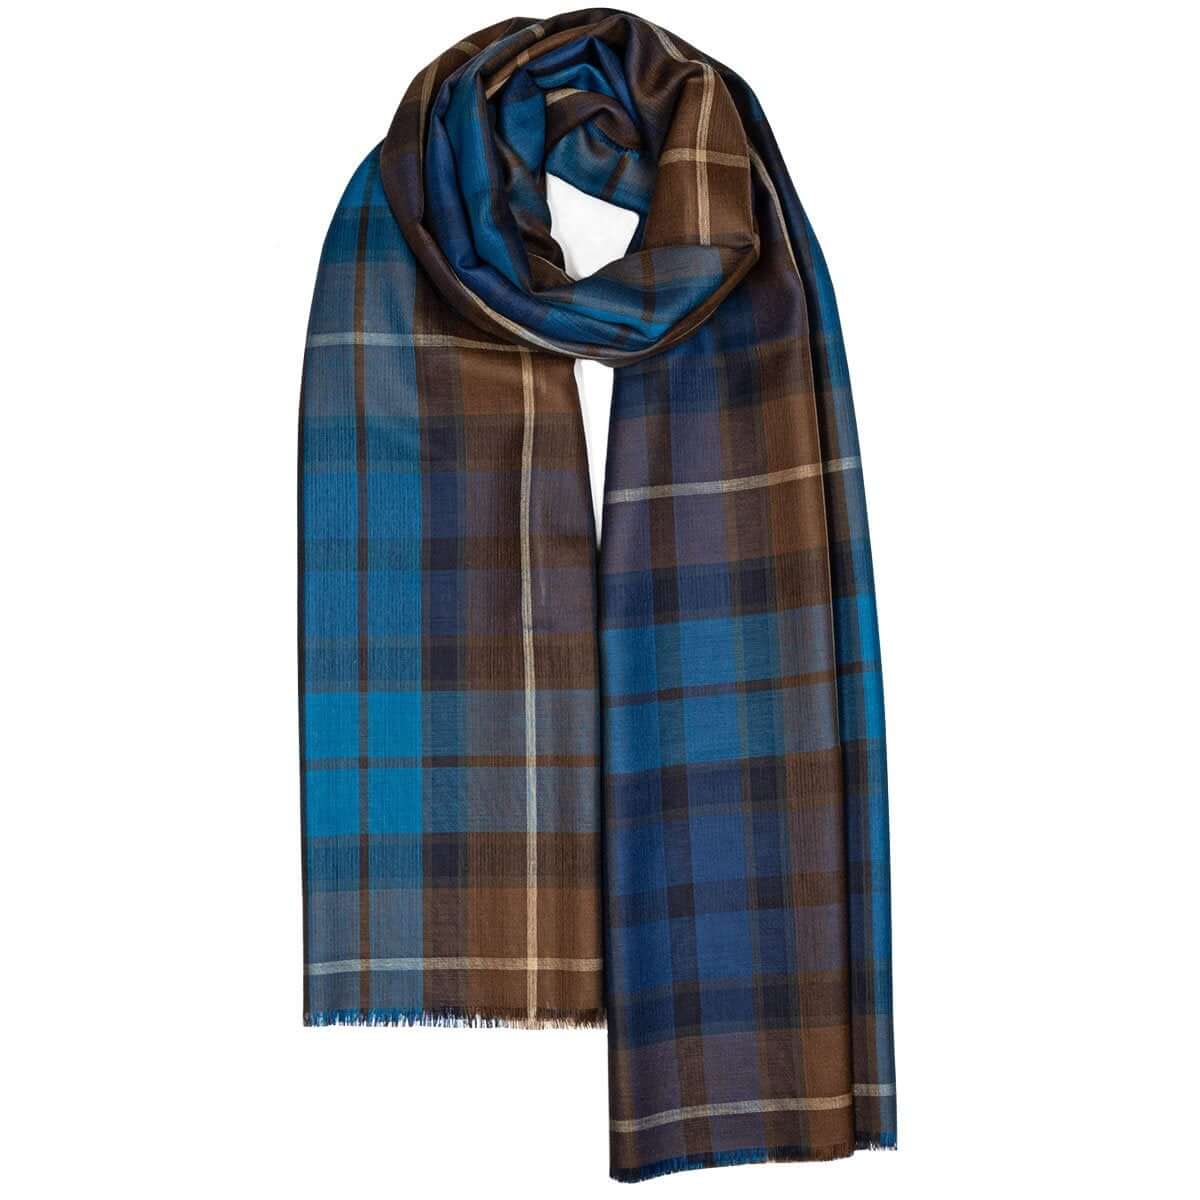 Ladies merino stoles from Anderson Kilts Dumfries